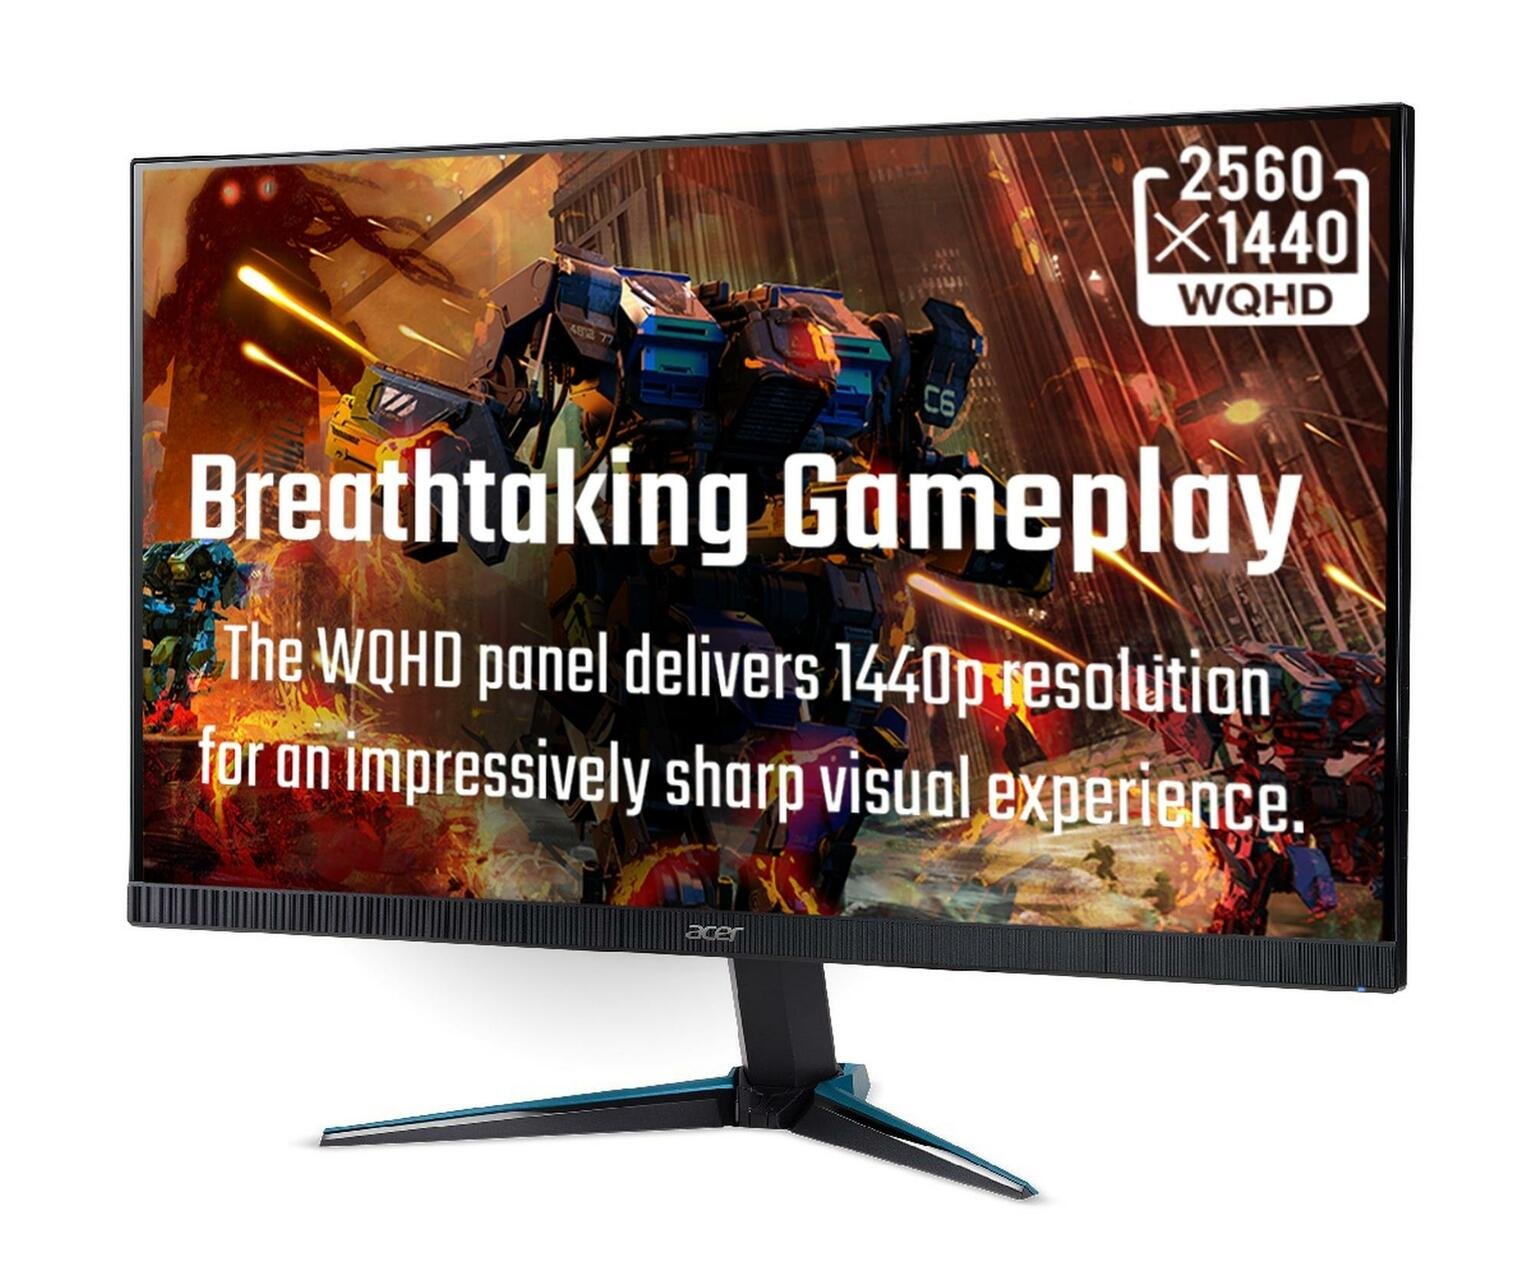 Acer VG270UP 27in 144Hz IPS WQHD Gaming Monitor Review